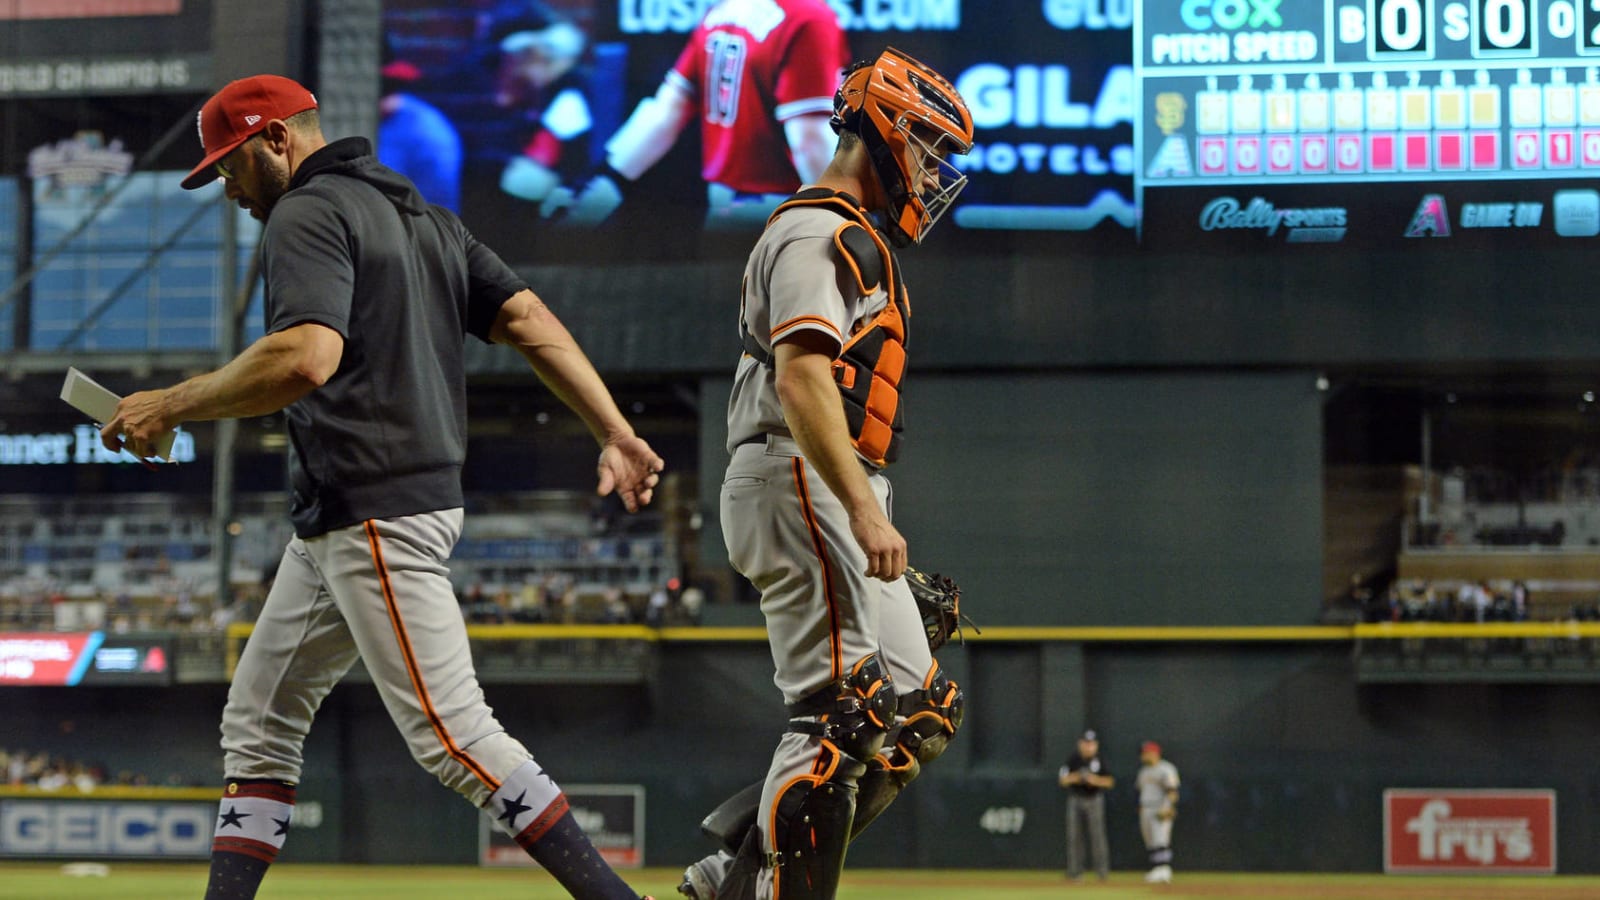 Giants catcher Buster Posey suffers thumb injury